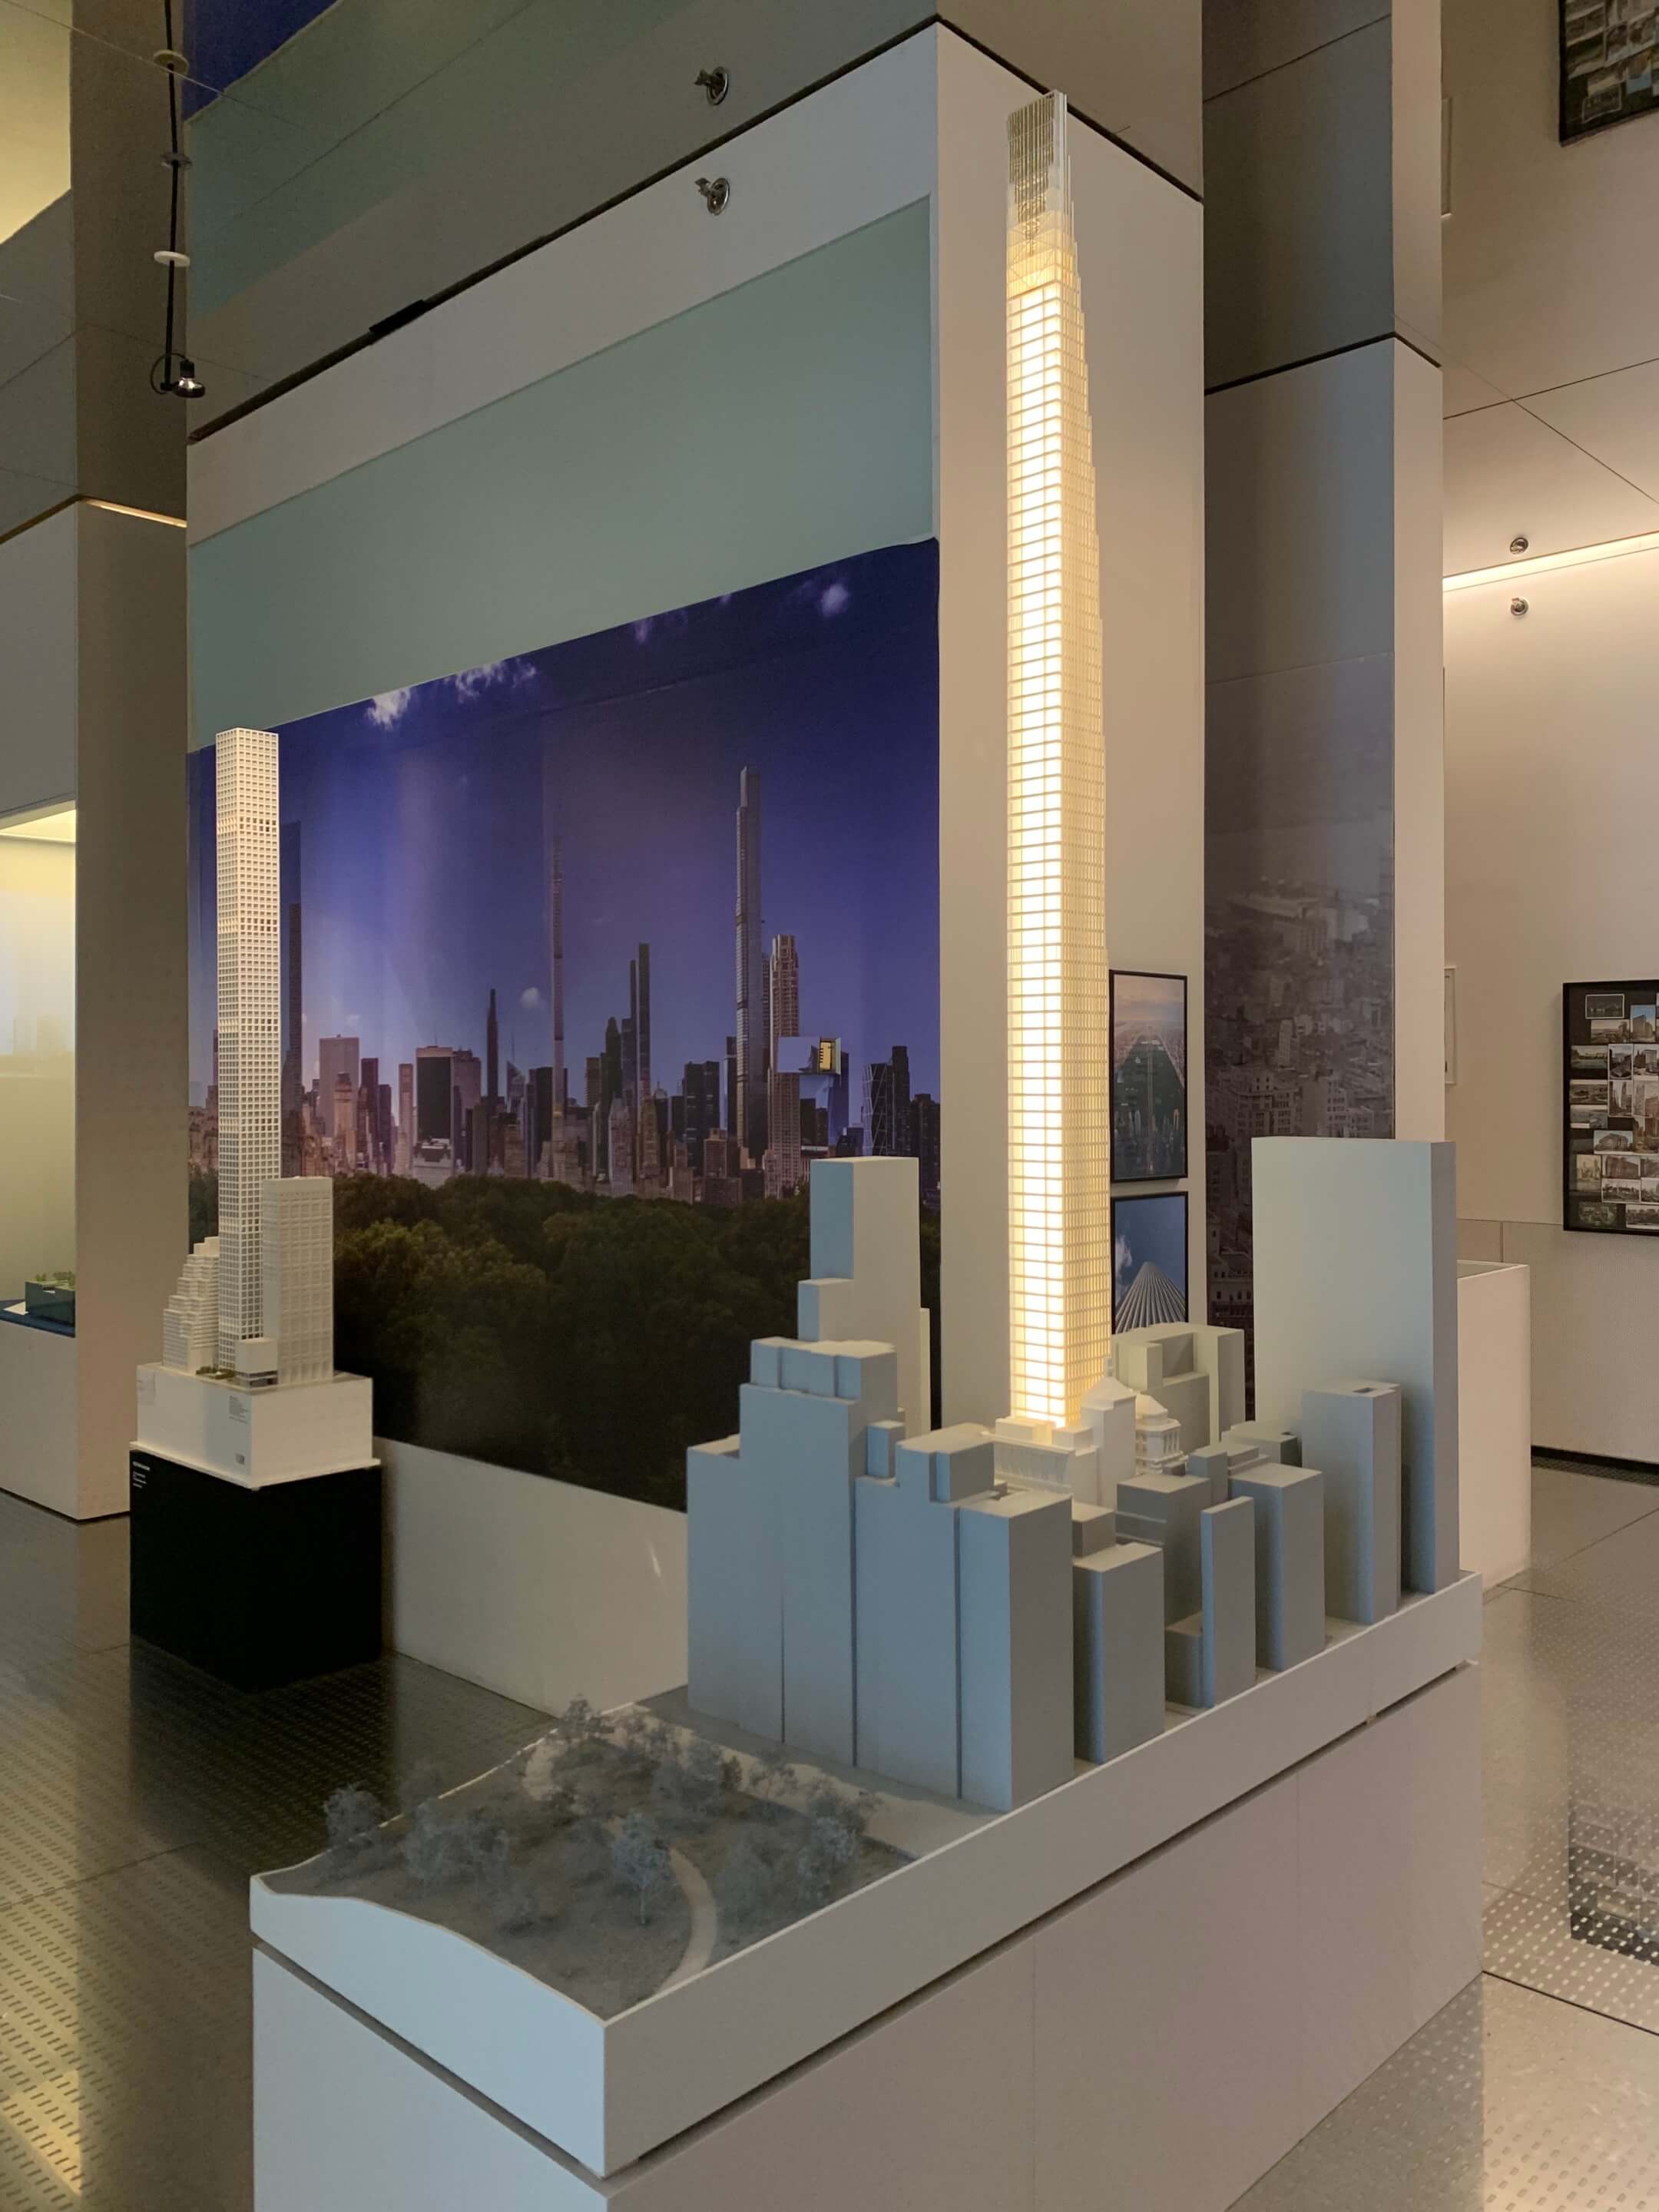 Models of 432 Park Avenue and the Steinway Tower